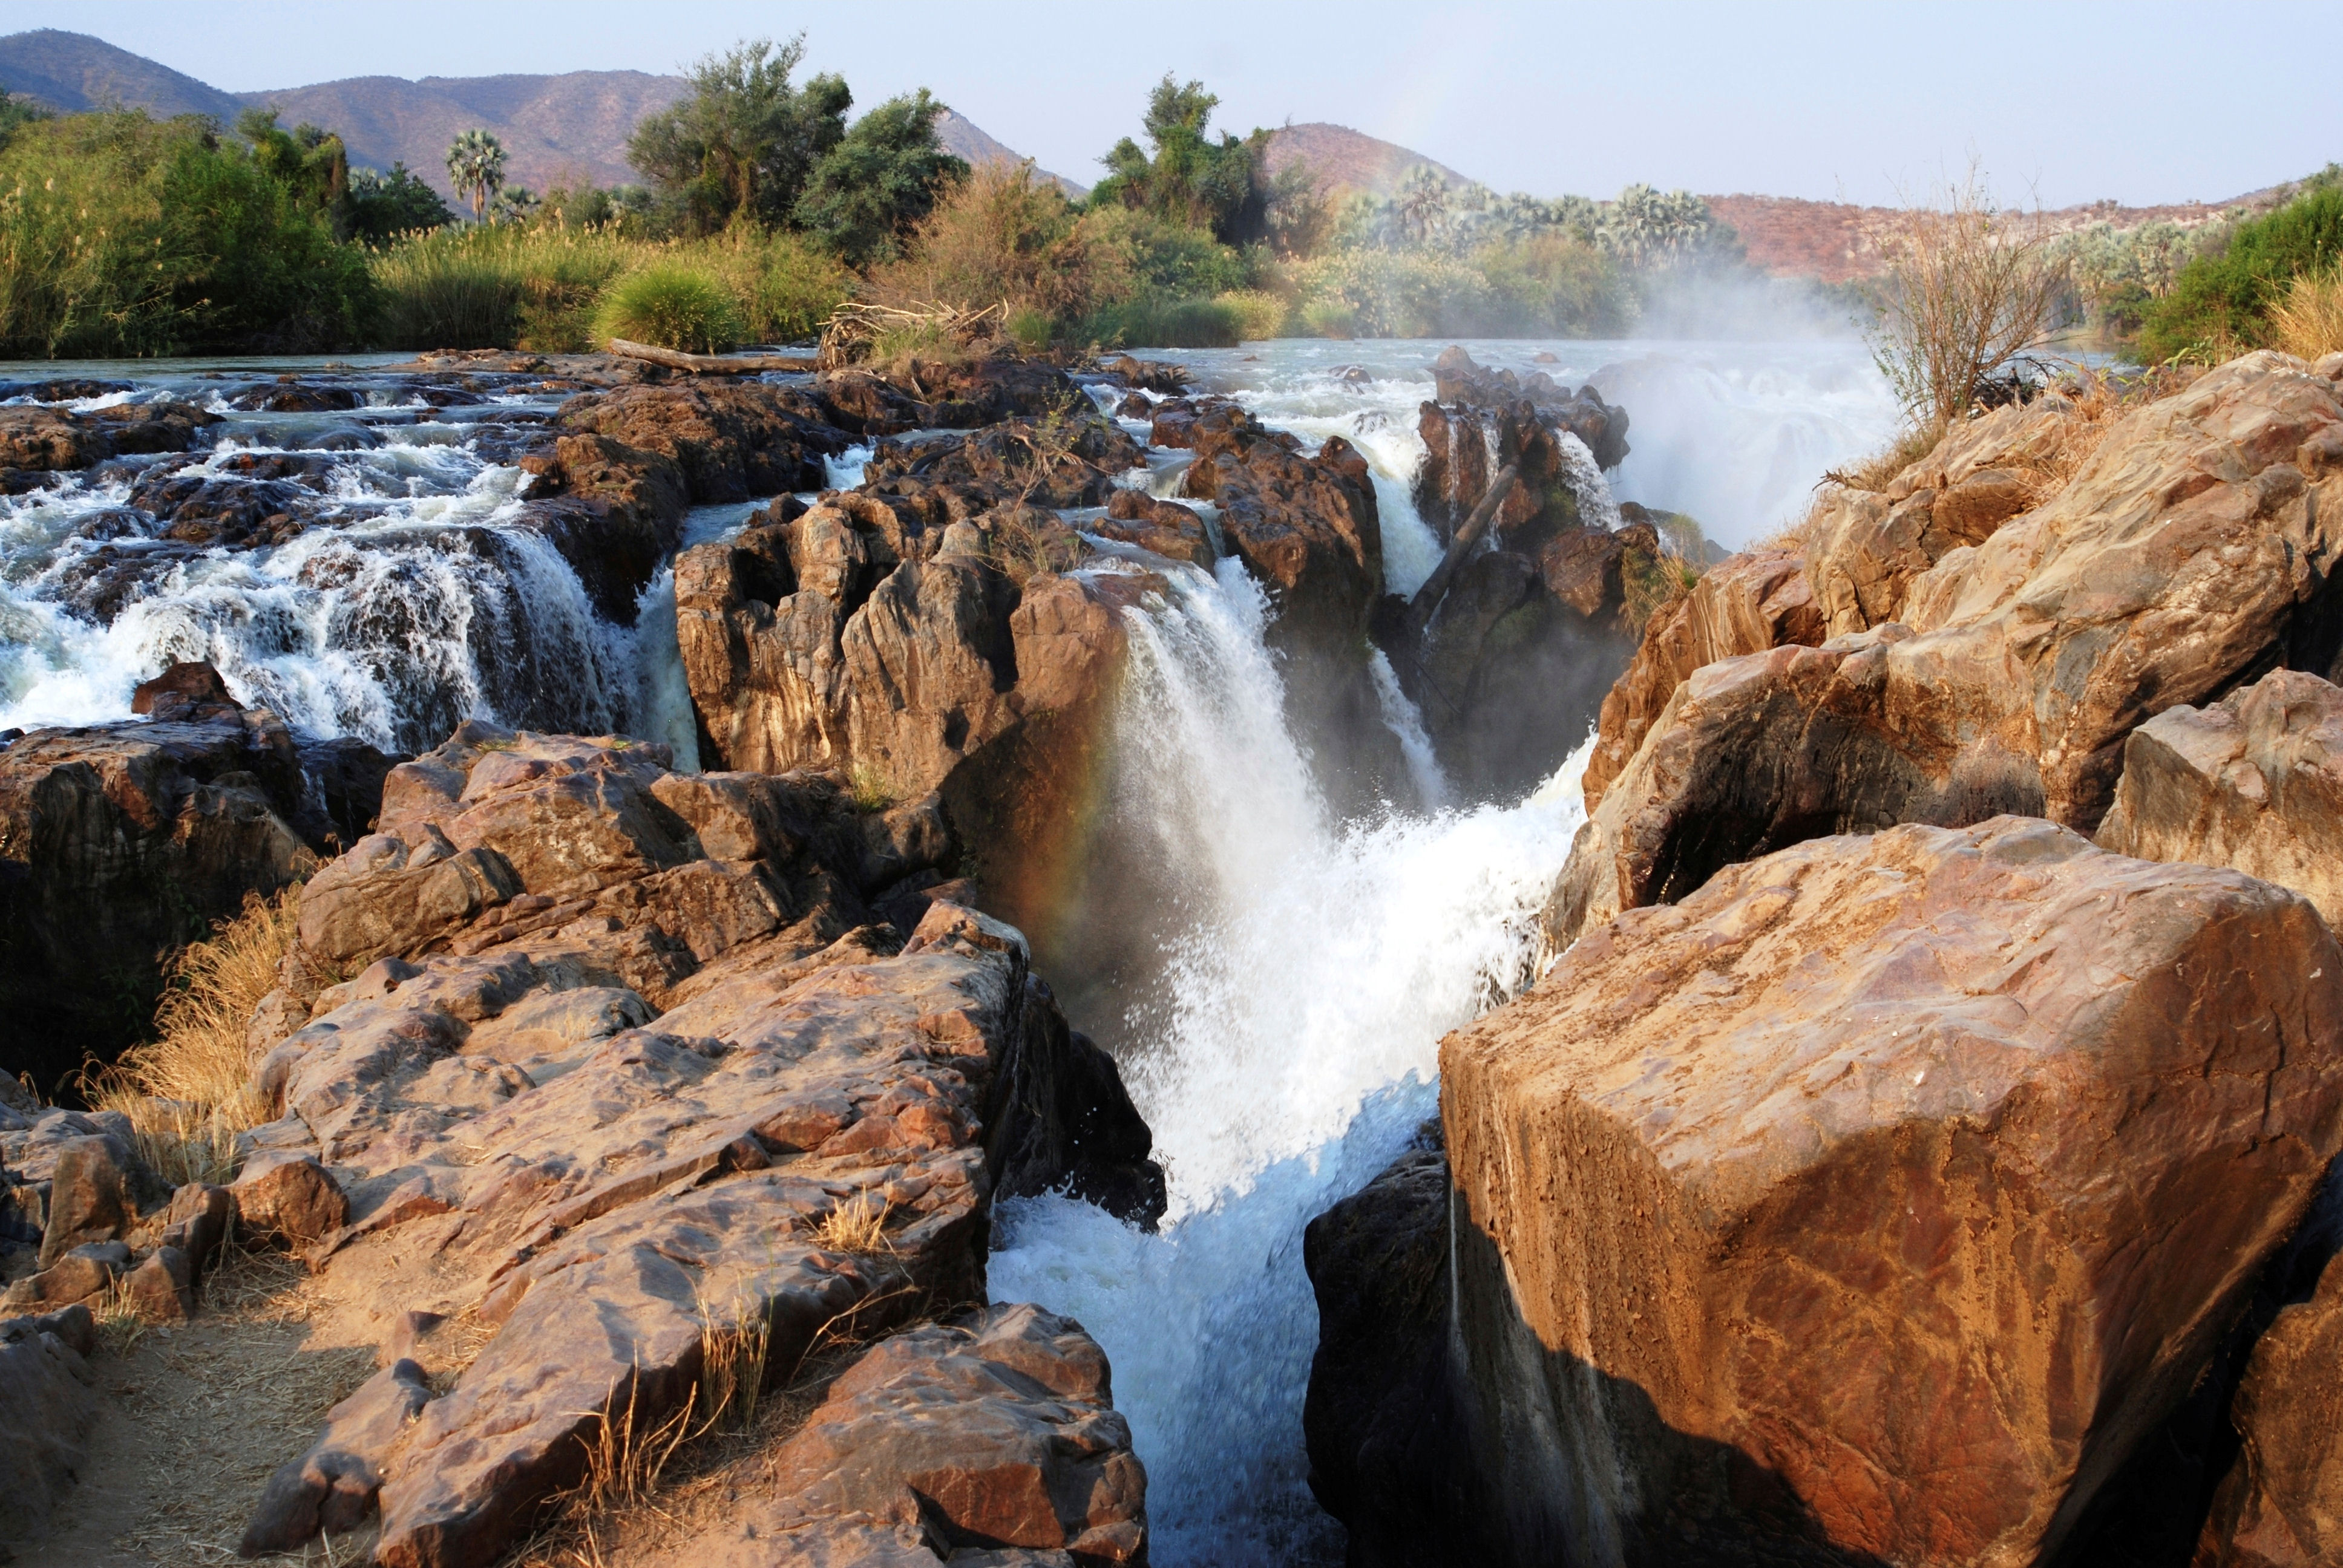 One of Angola's mighty waterfalls